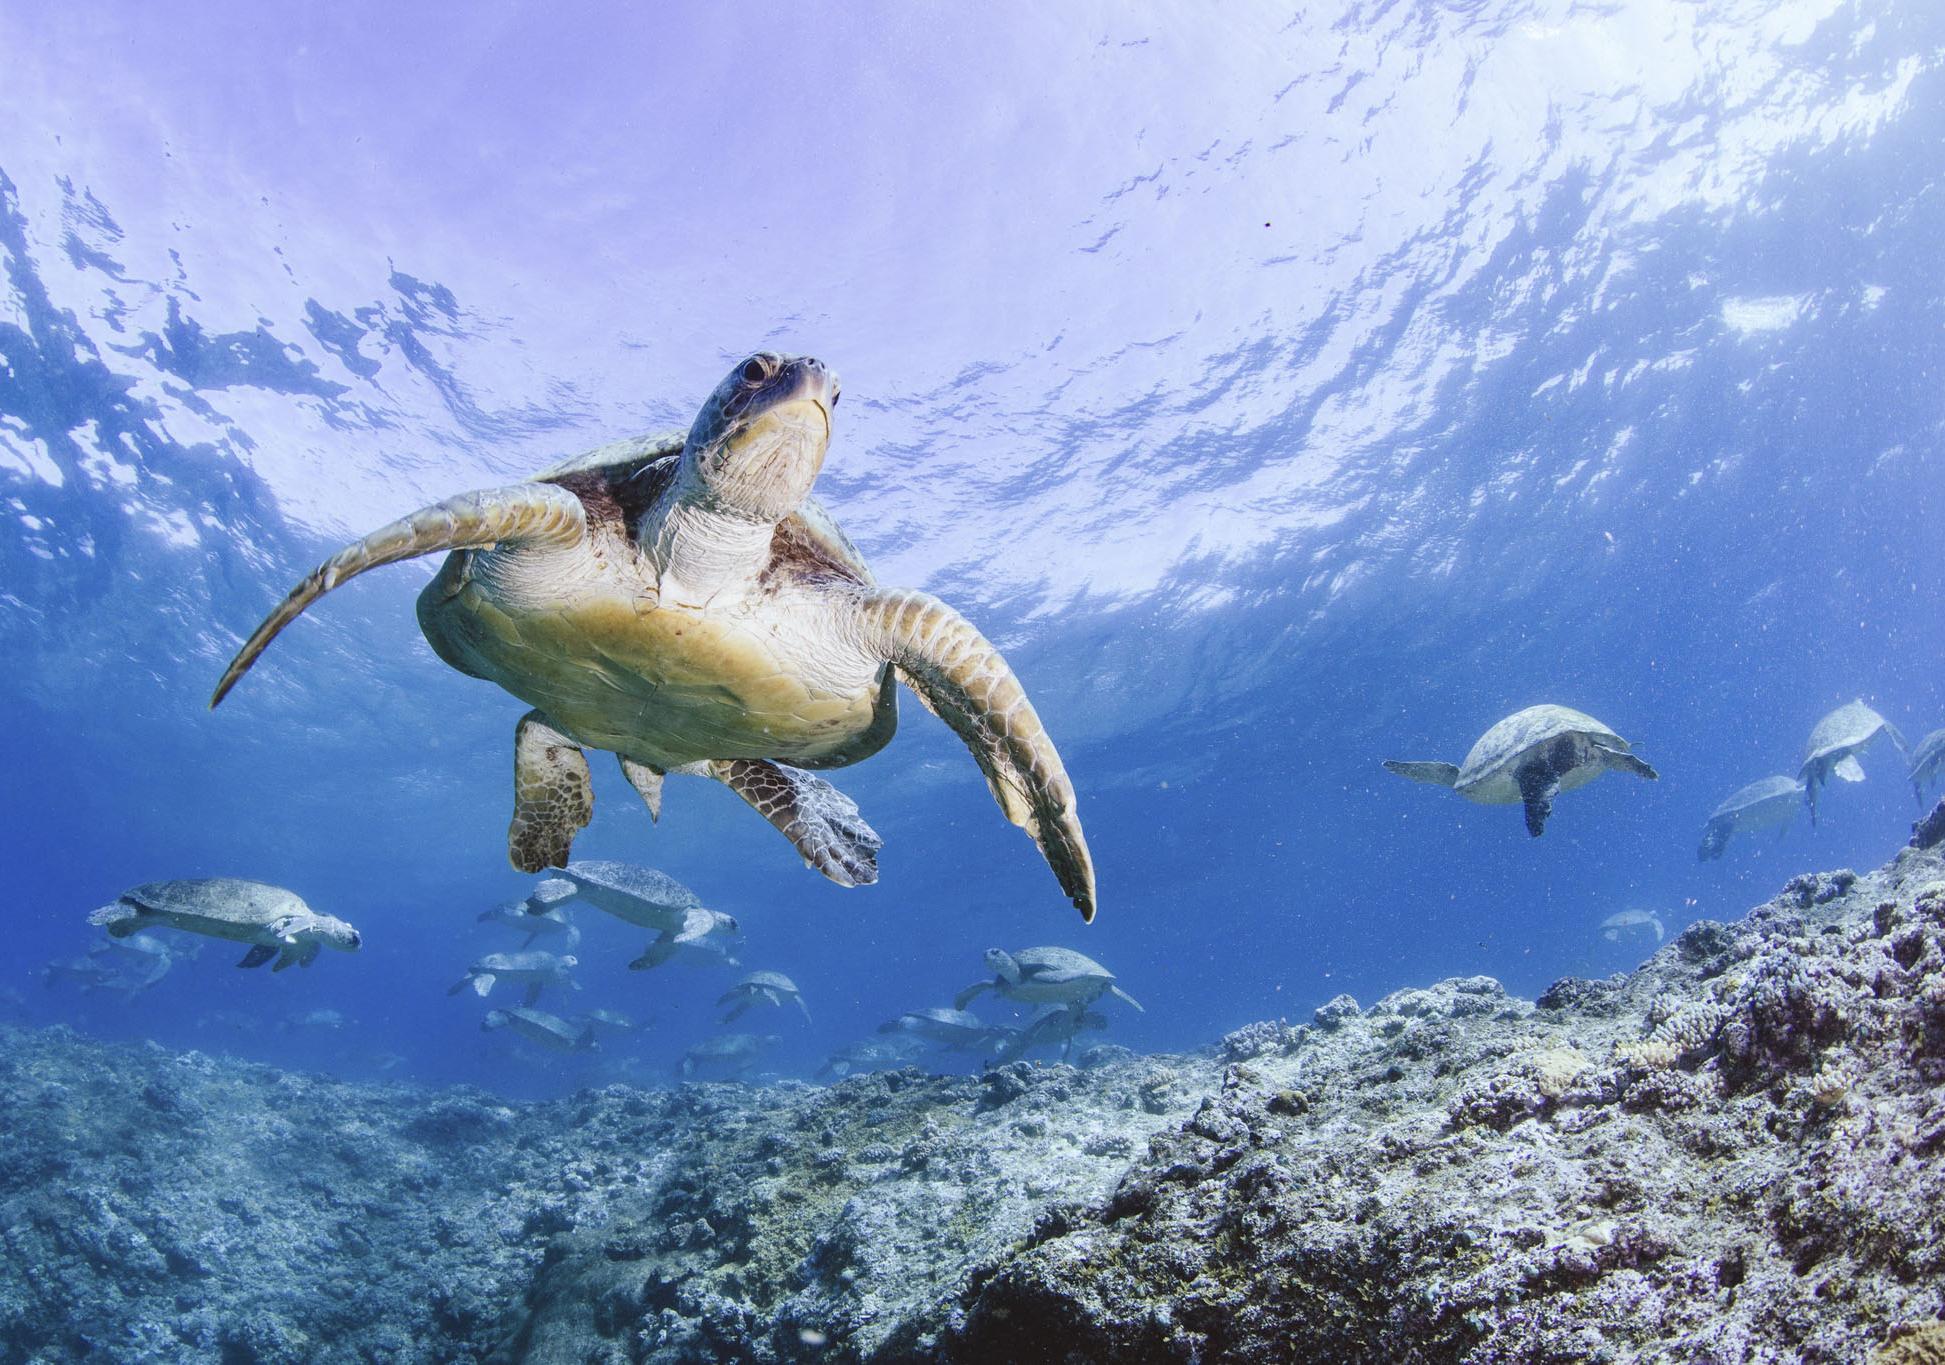 Underwater photo of a turtles swimming in the ocean above a rocky ocean floor with one turtle larger and close to the camera